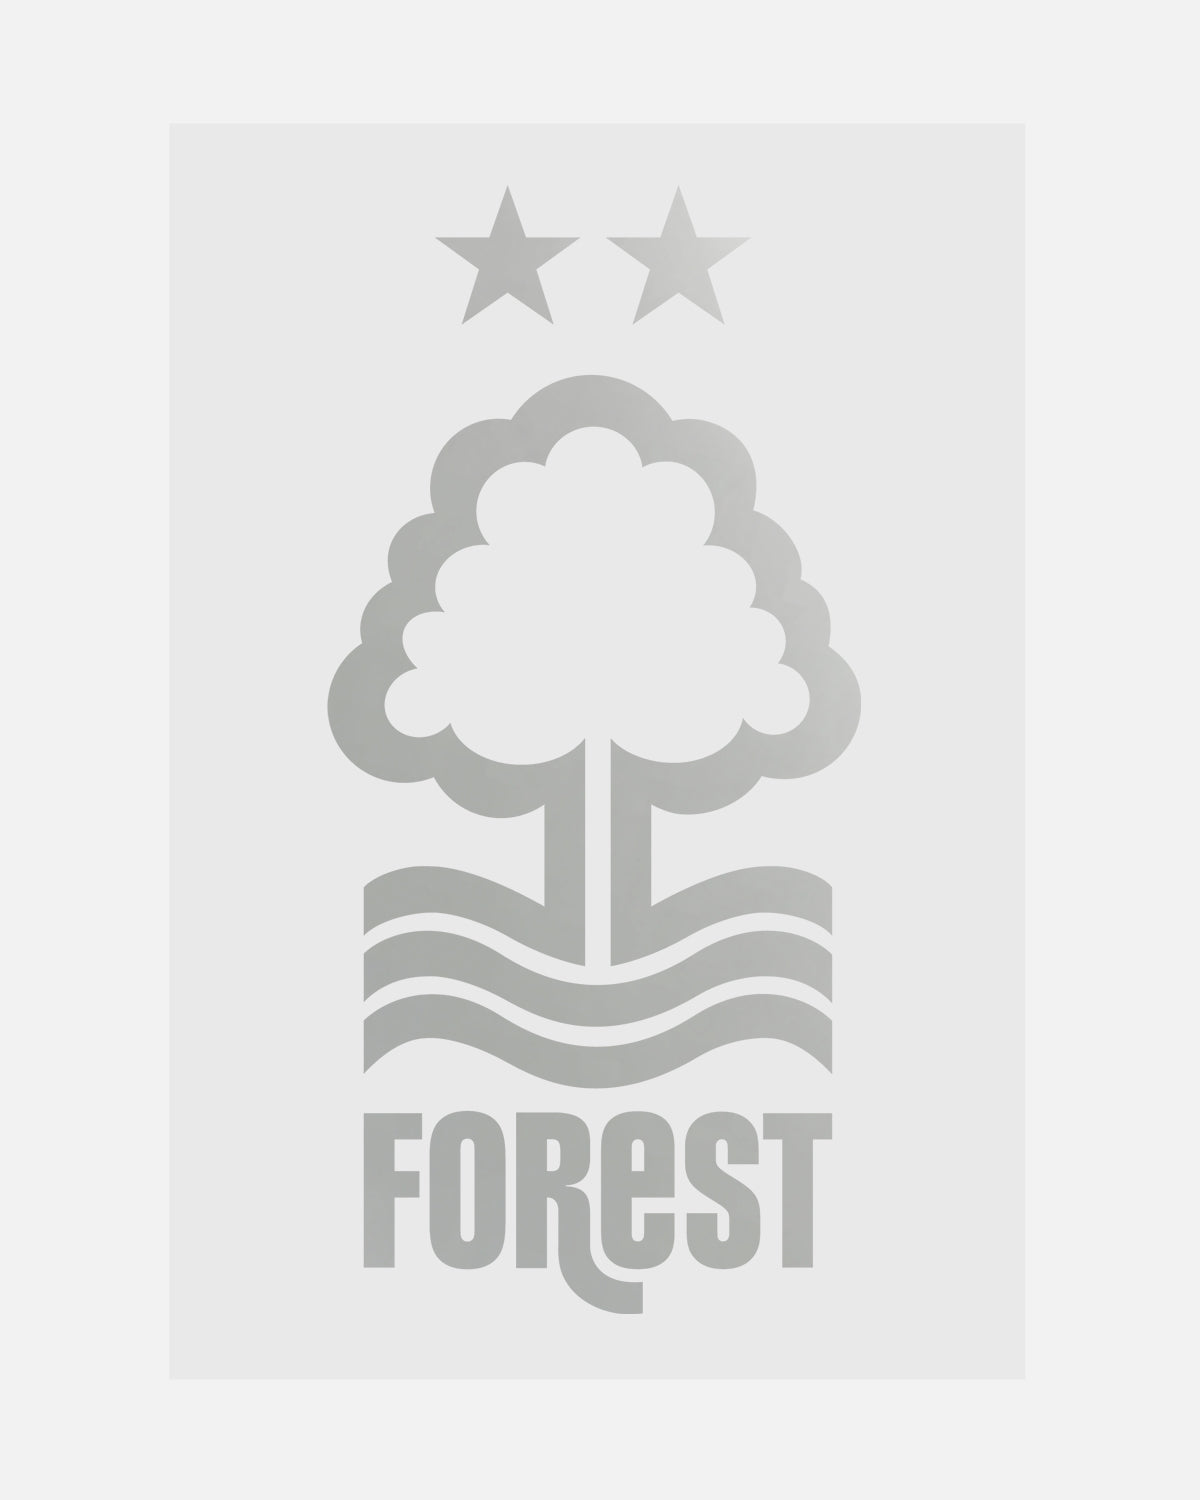 NFFC A4 Etched Crest Car Sticker - Nottingham Forest FC